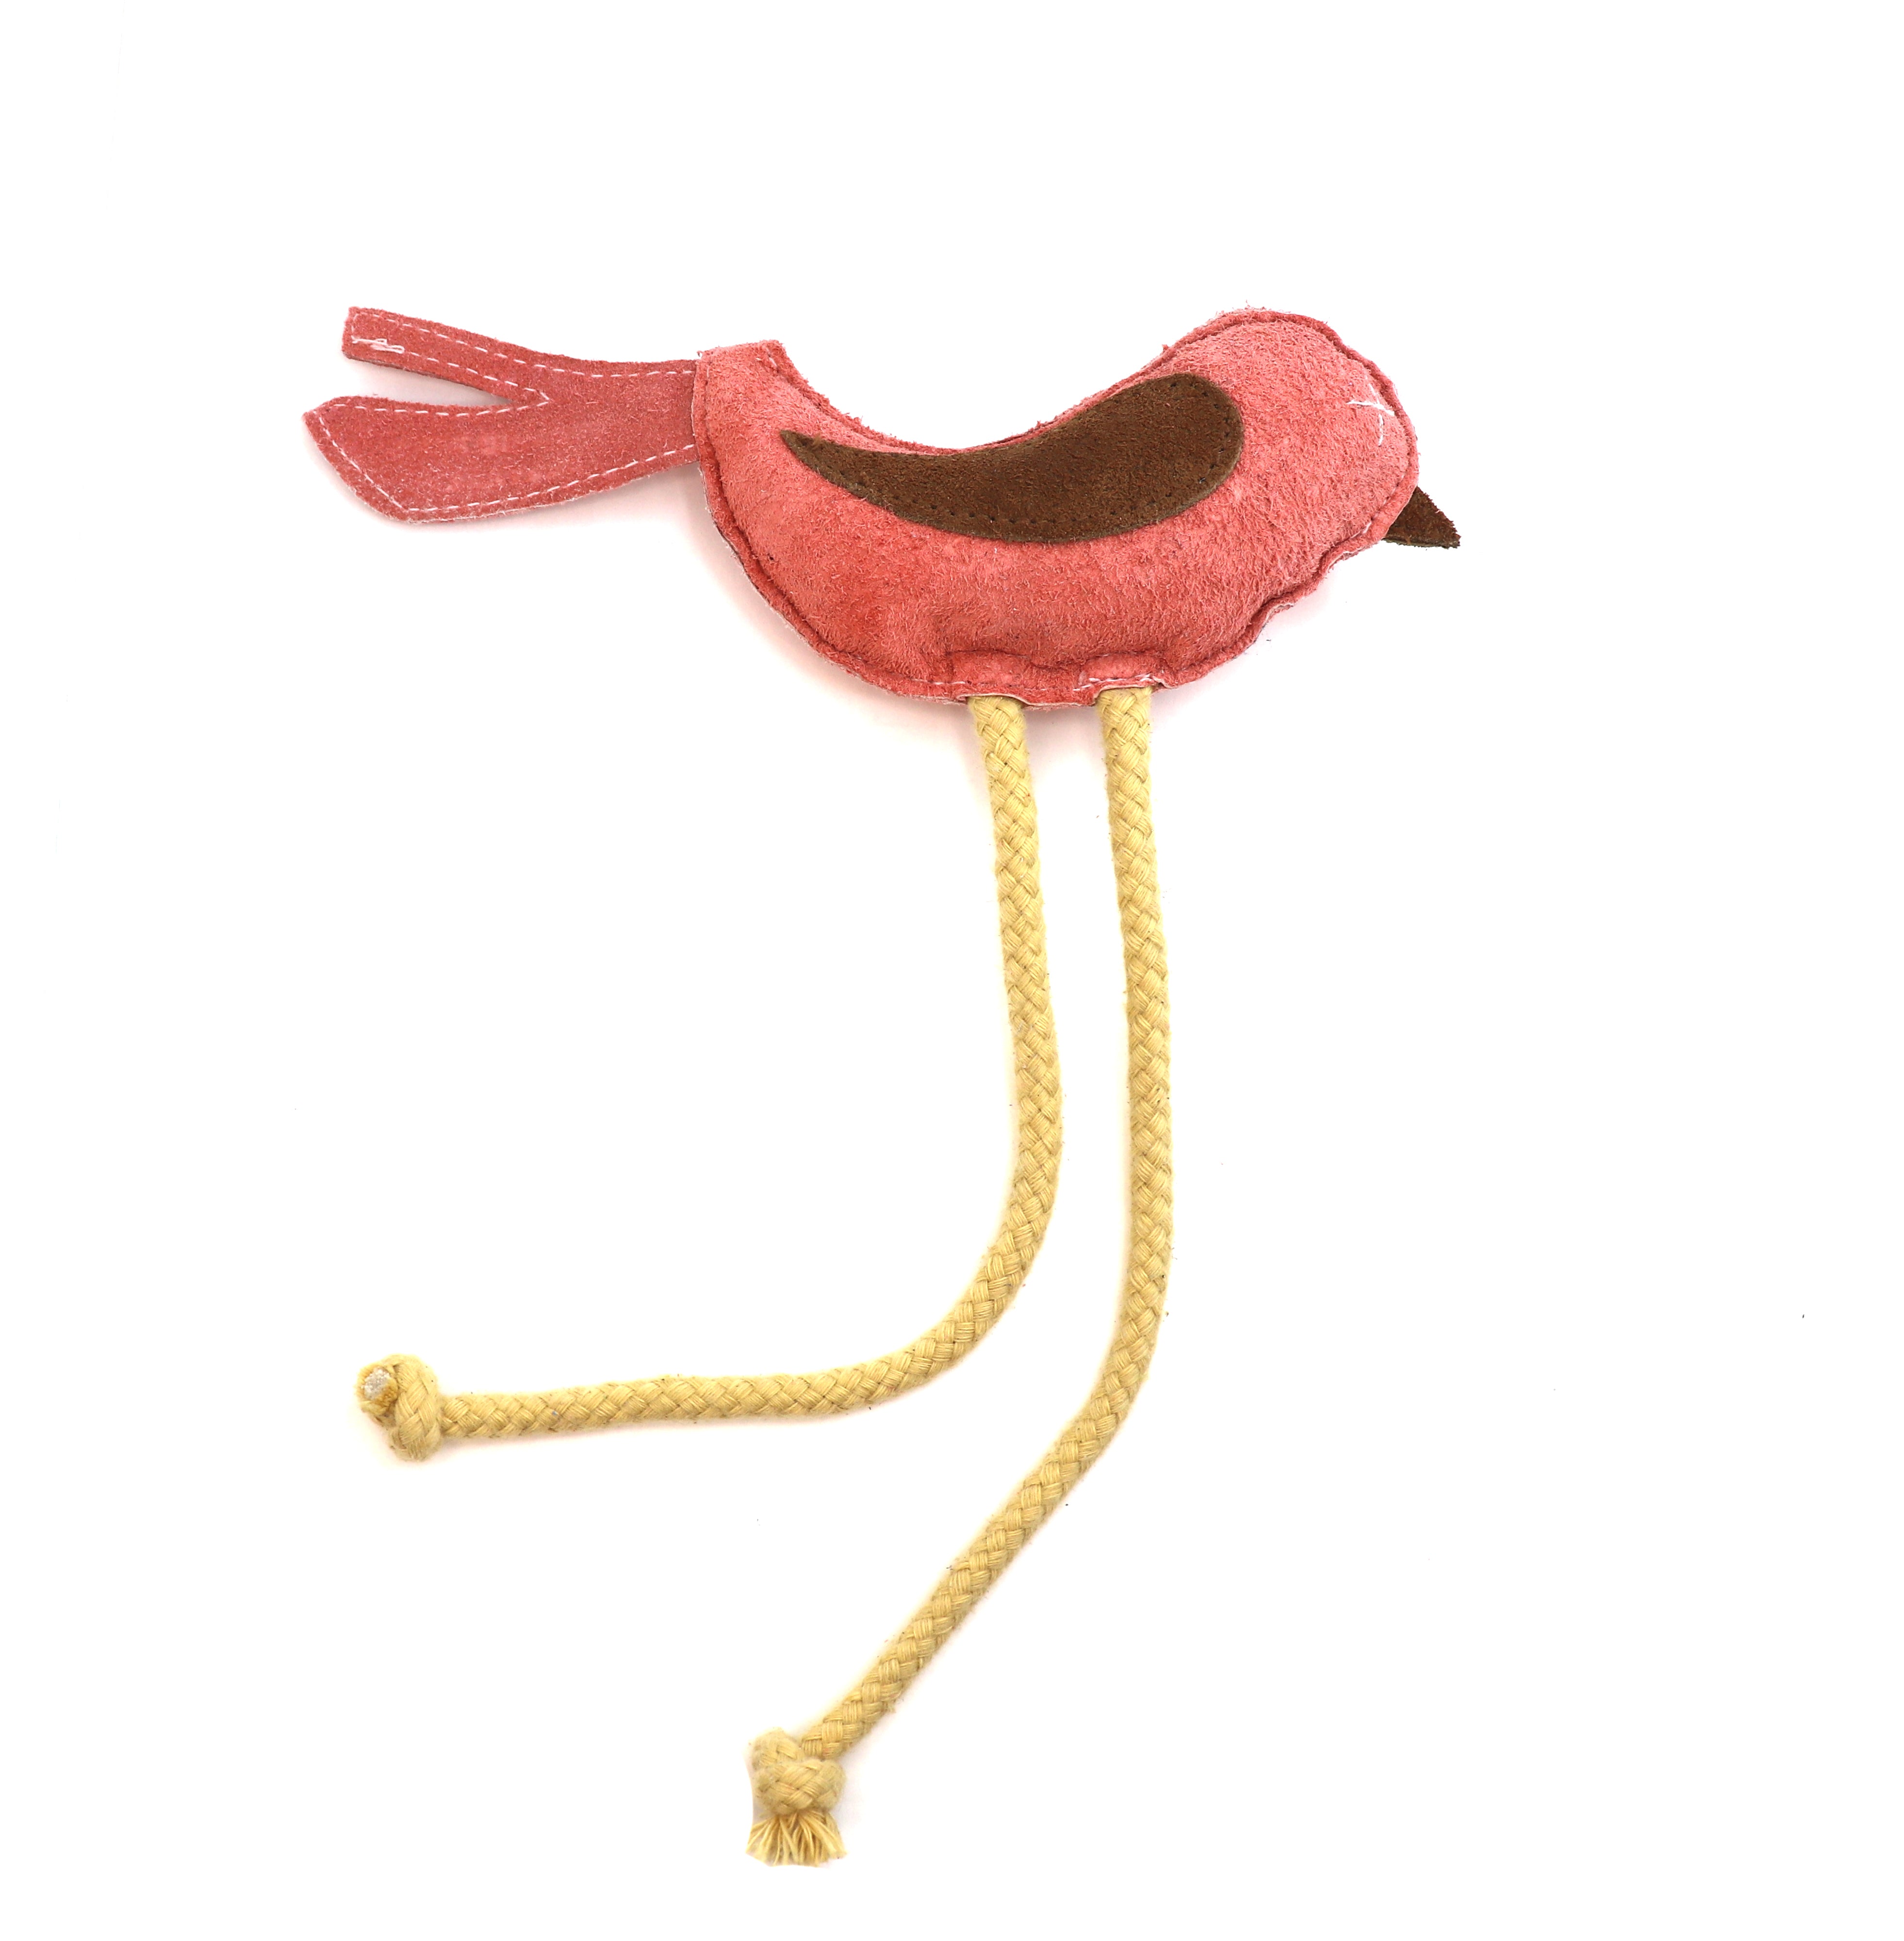 A whimsical pink and tan Birdy Toy with a long, yellow braided tassel resembling legs, isolated on a white background. The bird features a cut-out section, simulating a wing. Ideal for Georgie Paws enthusiasts.